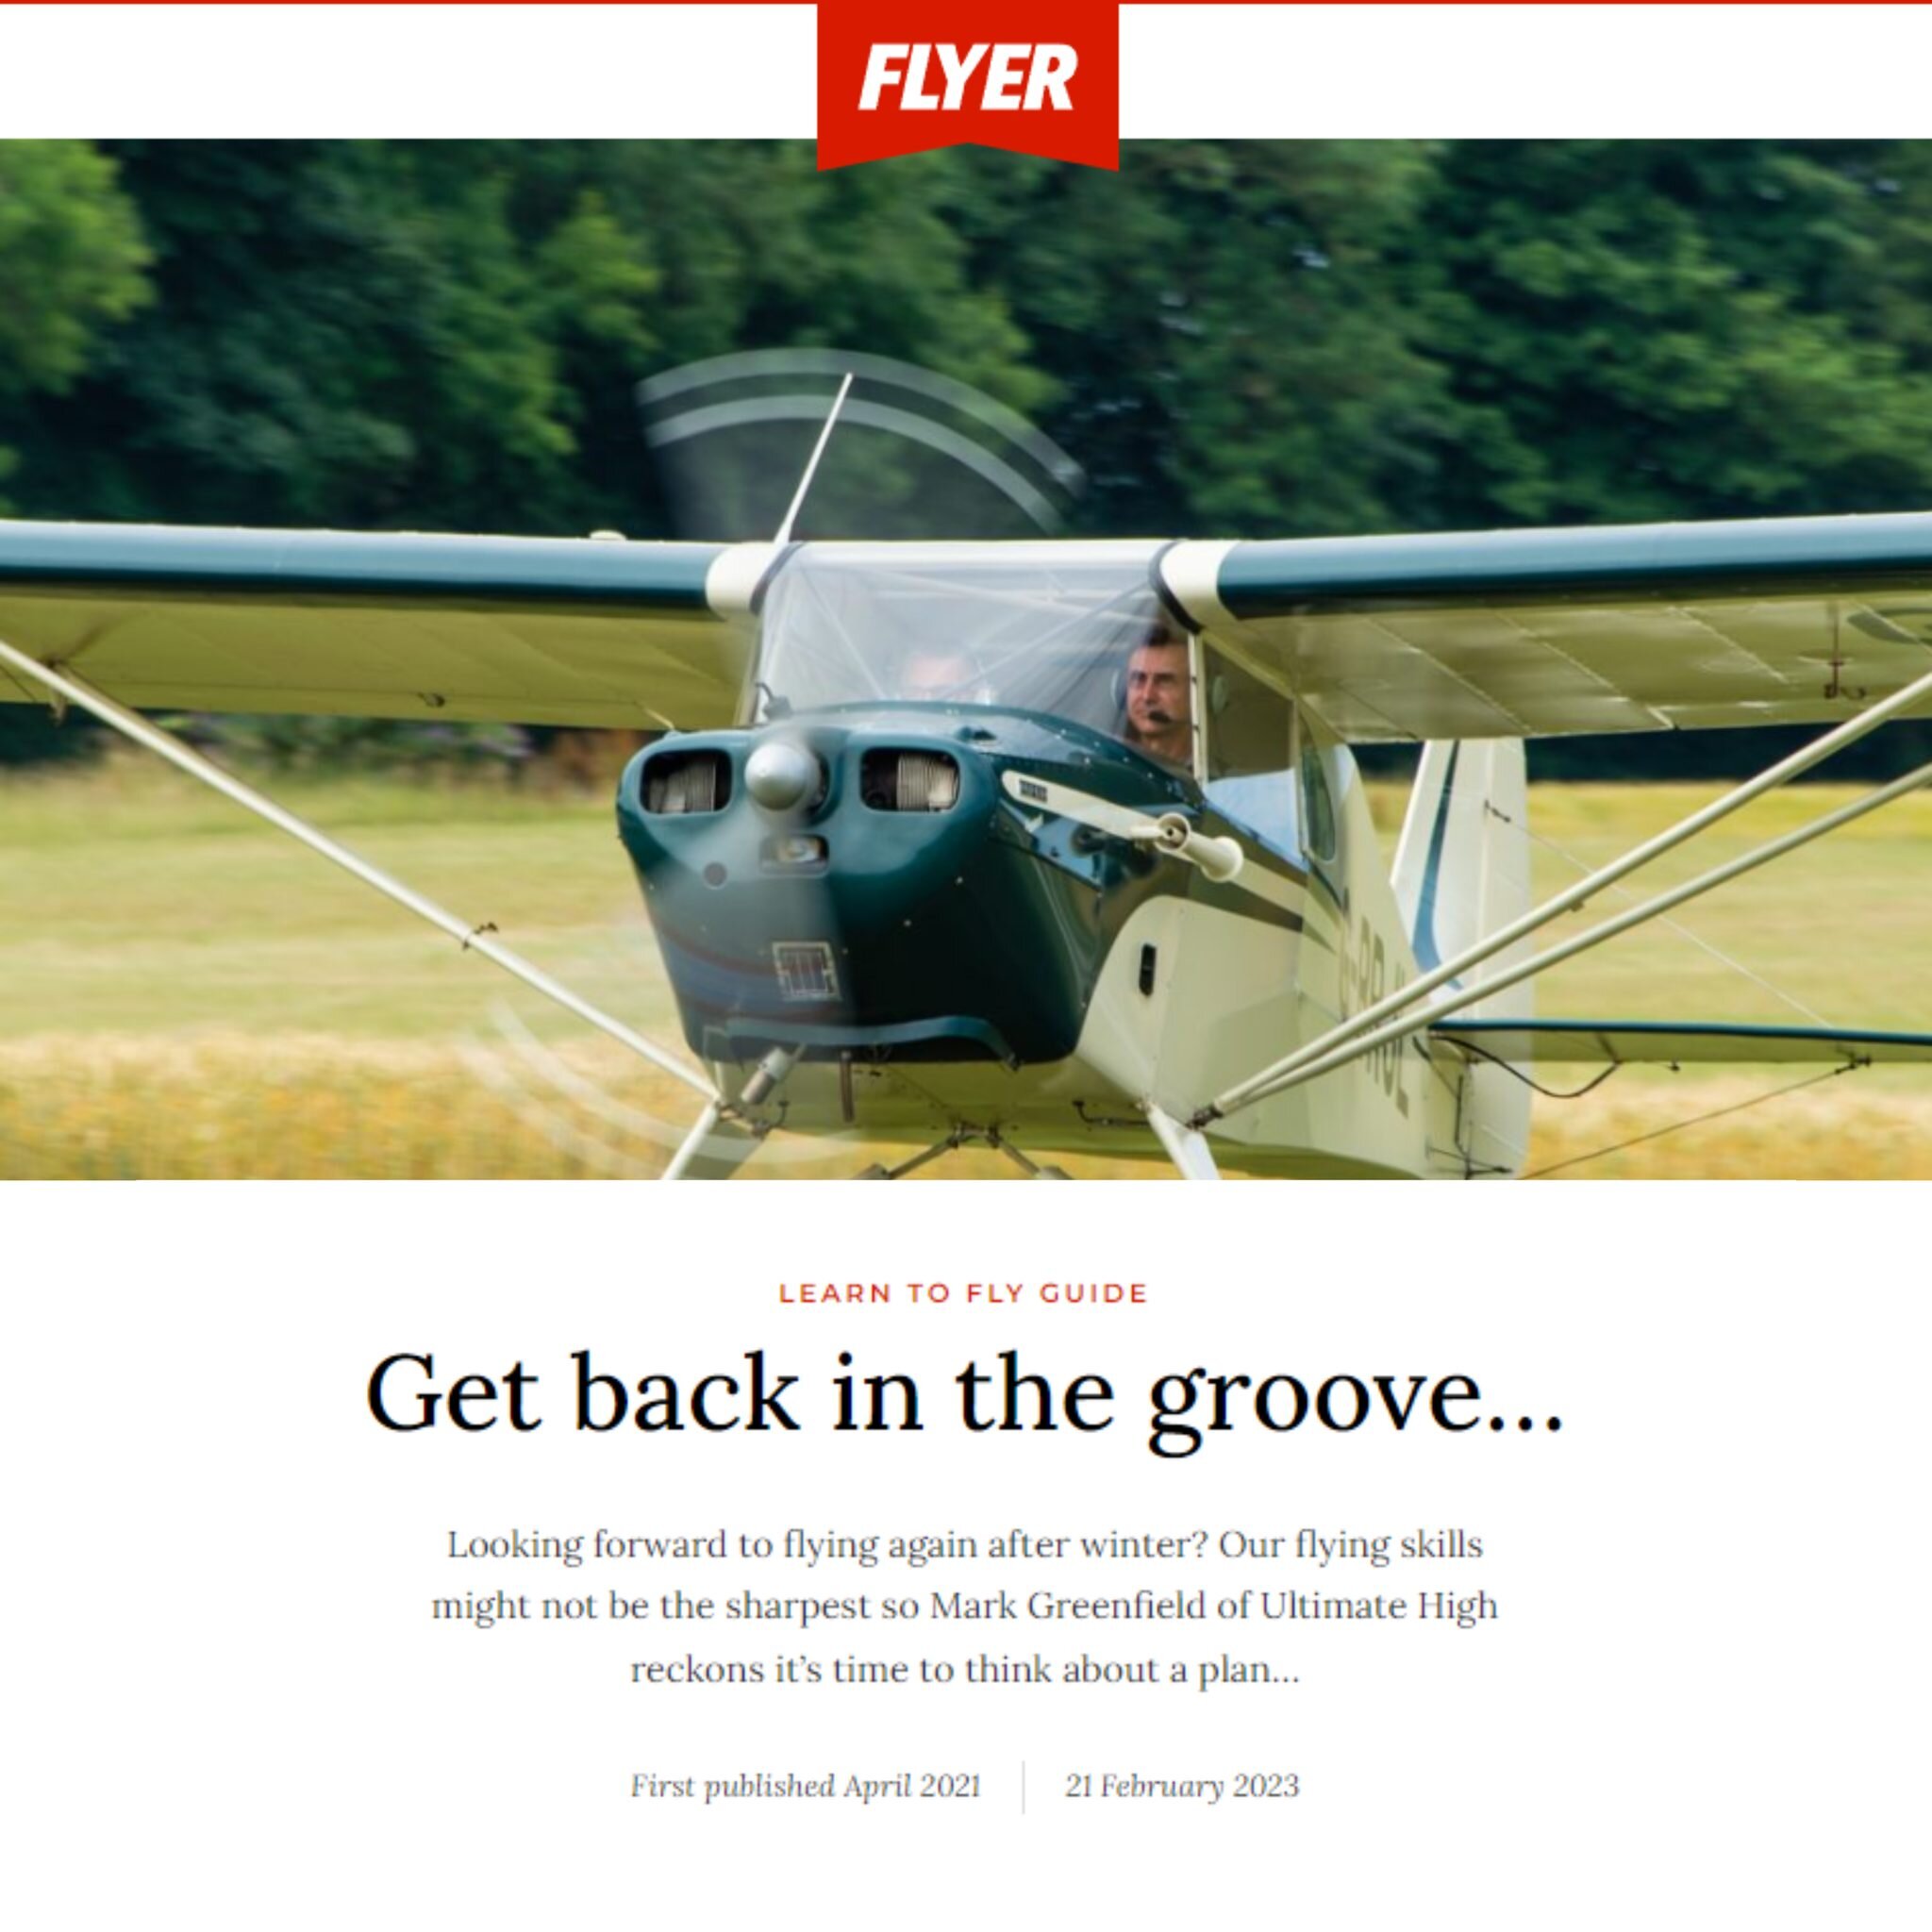 Looking forward to flying again after winter? 

You might experience some skill fade when you do fly for the first time after a break.  @flyermag published this great return to flying article which is worth a read!

Go to the Flyer website to find th